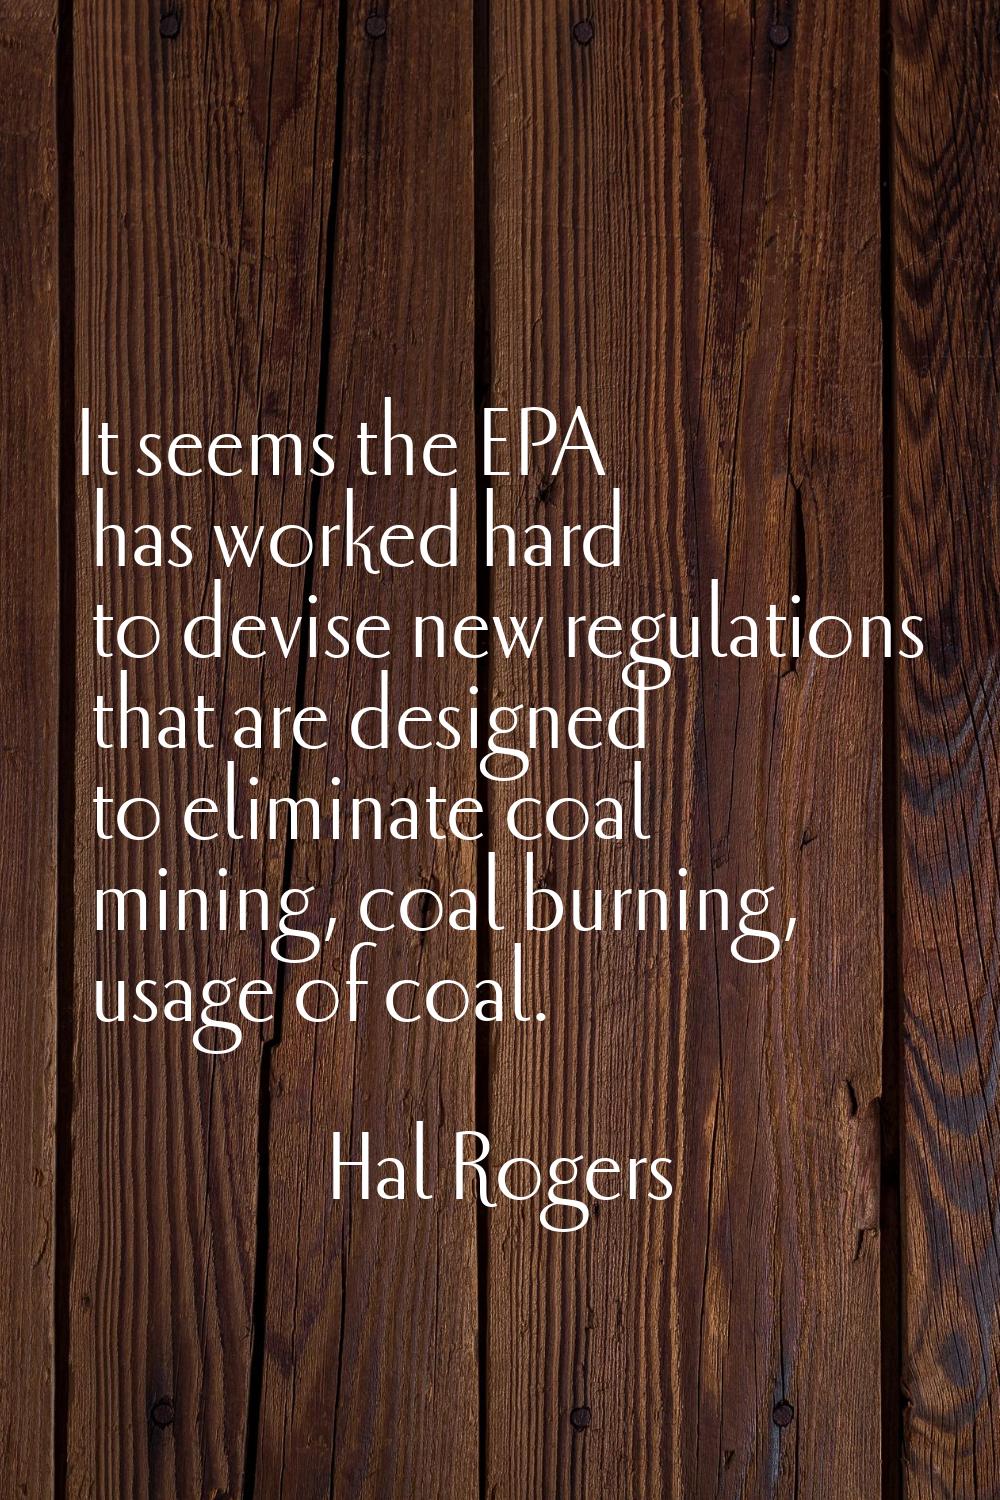 It seems the EPA has worked hard to devise new regulations that are designed to eliminate coal mini